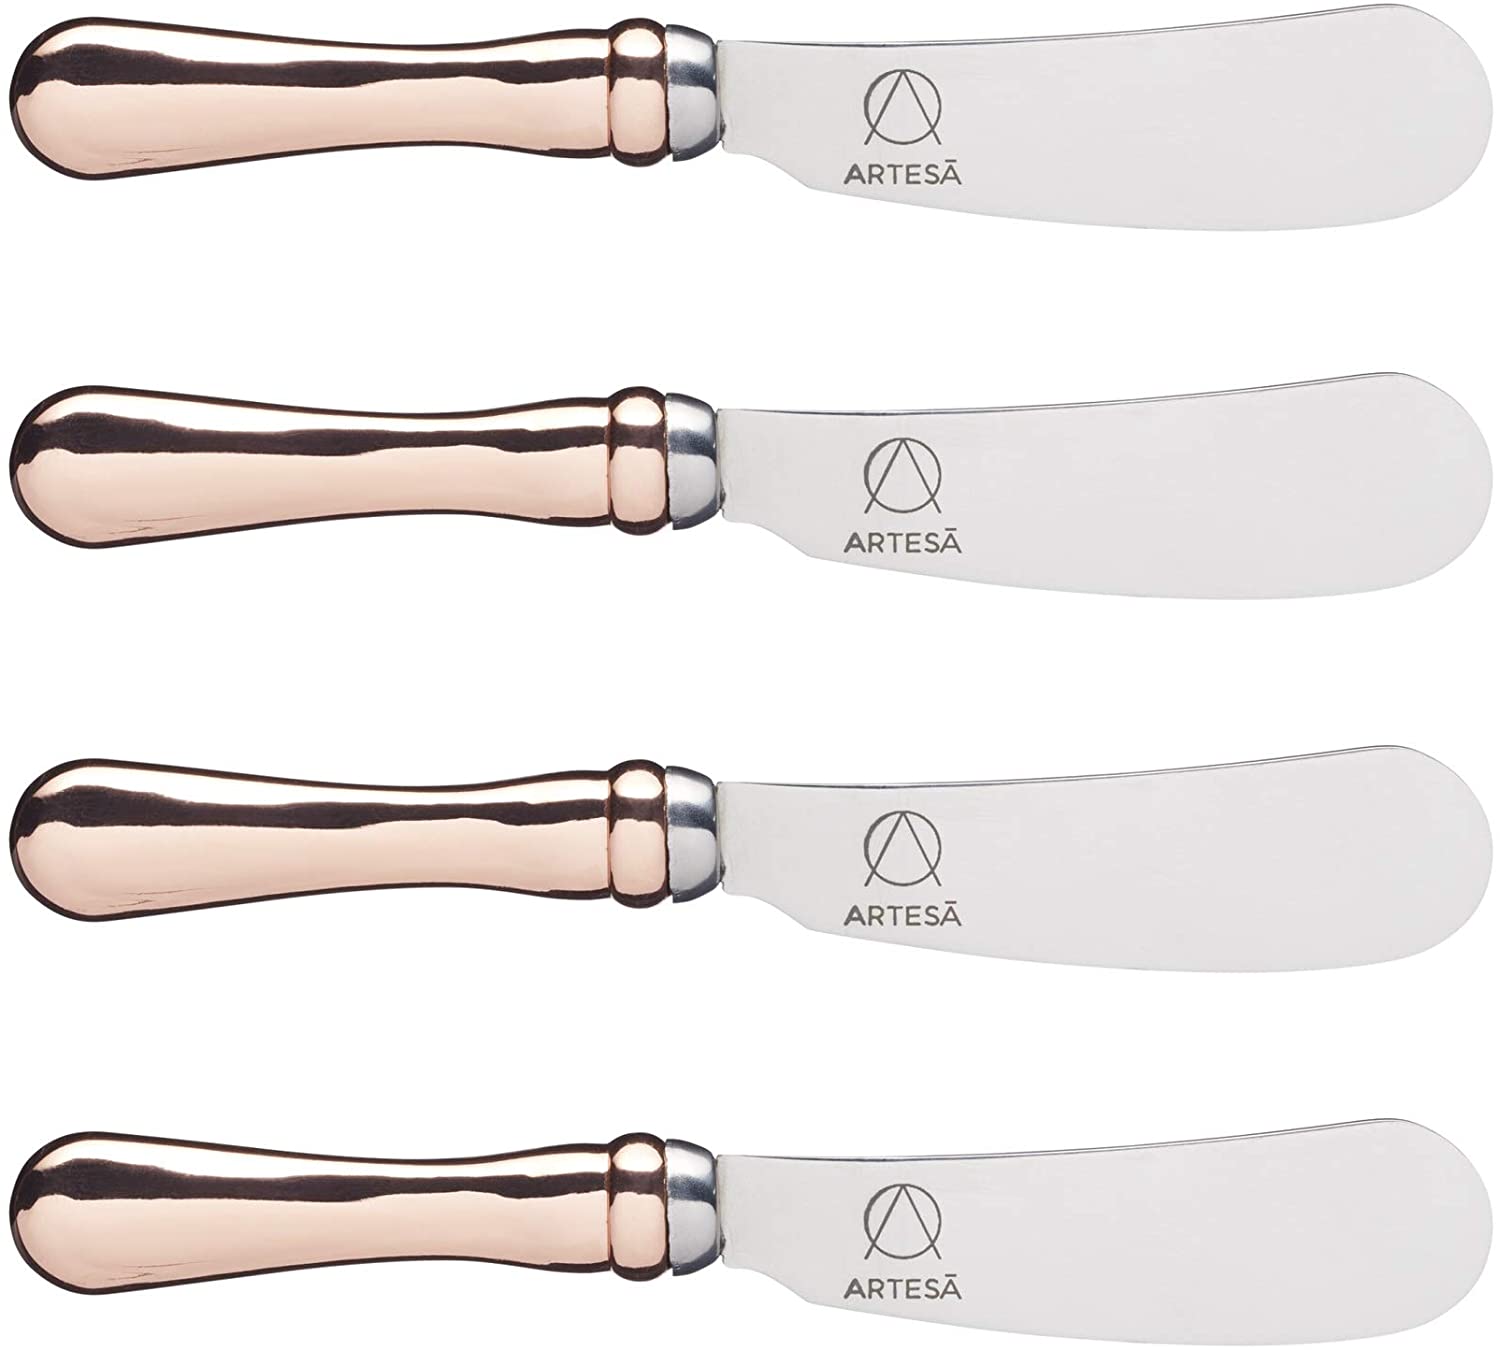 MasterClass Artesà Butter Knife Set with Rose Gold Effect Handles, Set of 4, Cheese or Butter Spreading Knives for Cracker and More, Stainless Steel, 12 cm